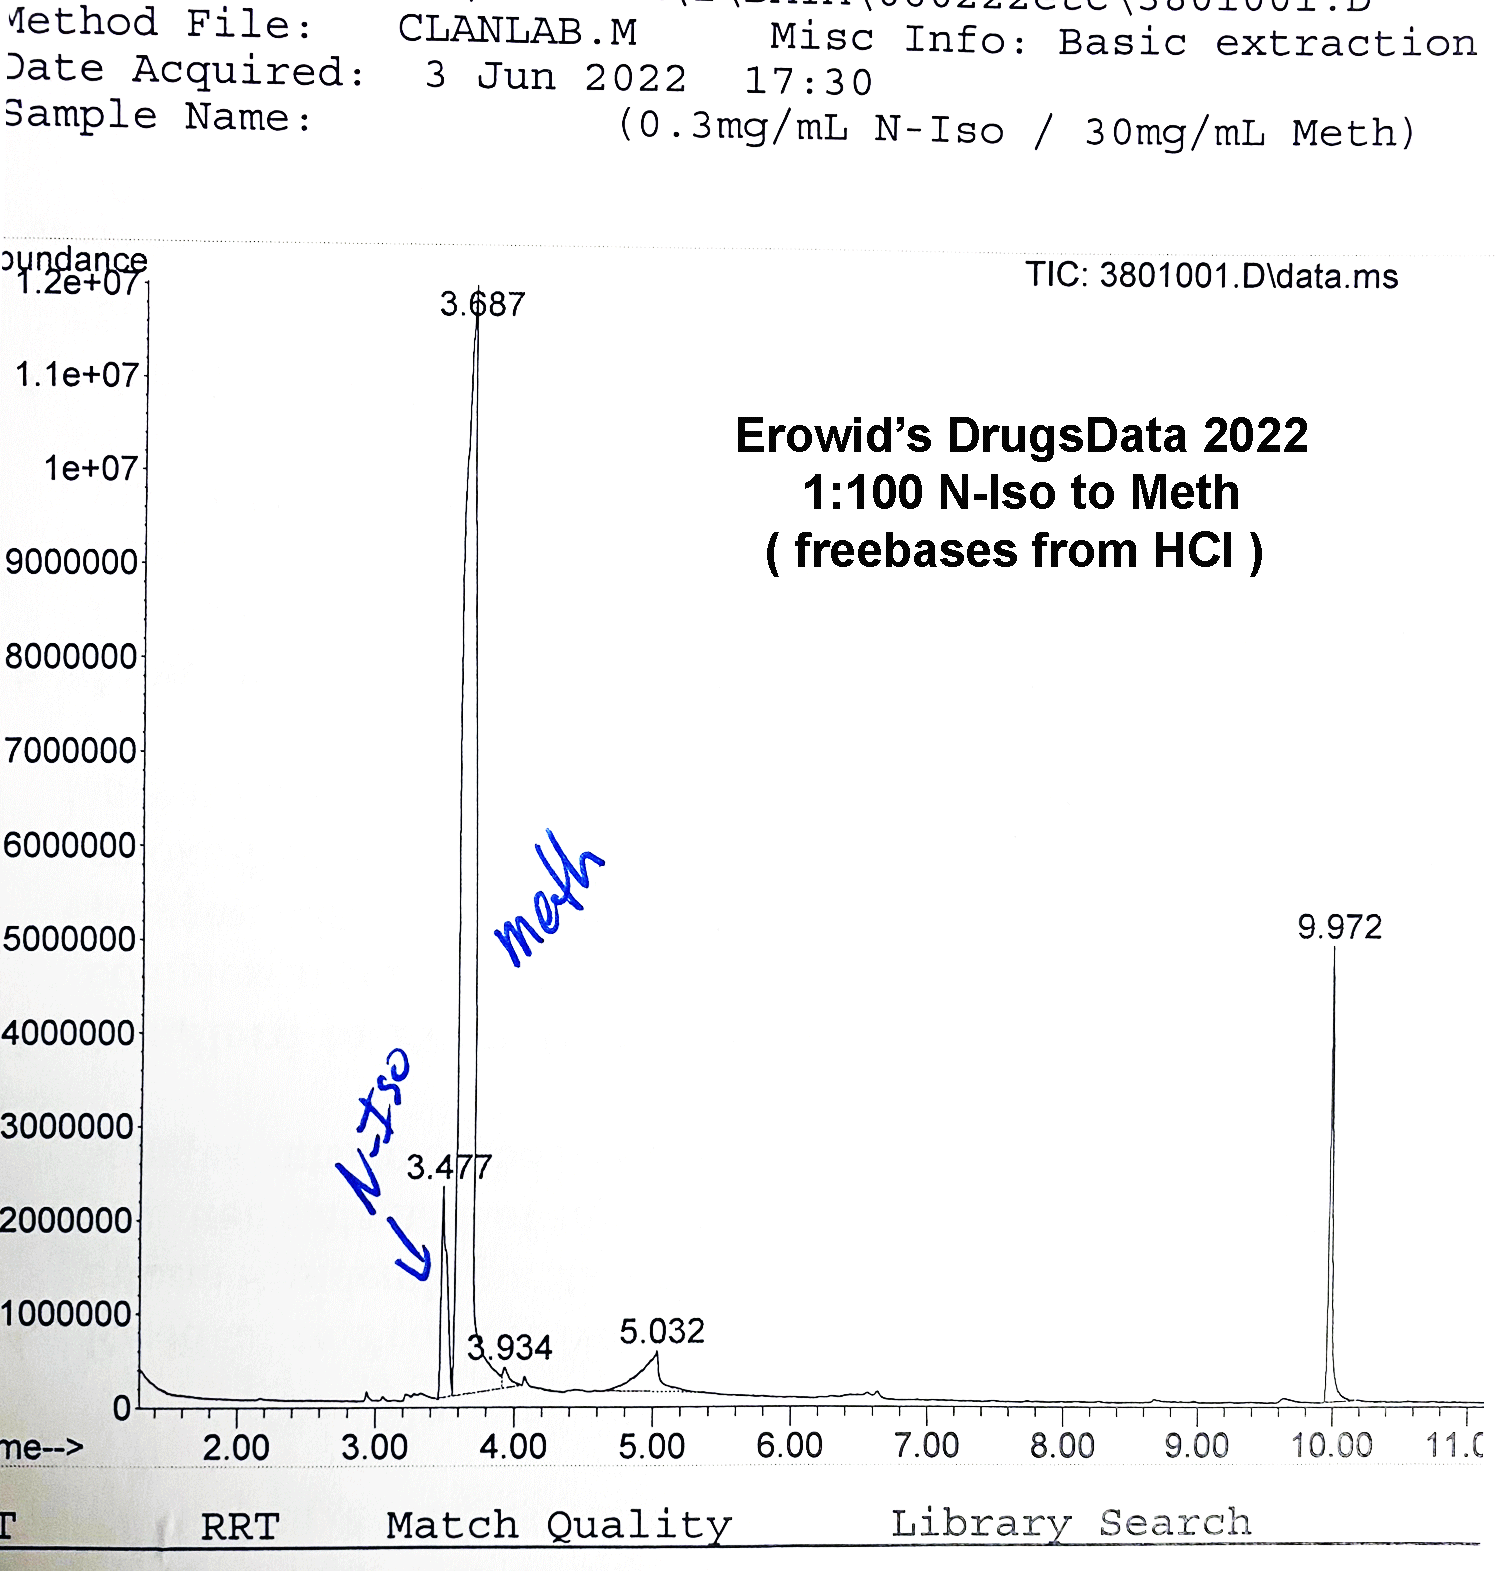 GC of N-Iso and Meth (1:100)